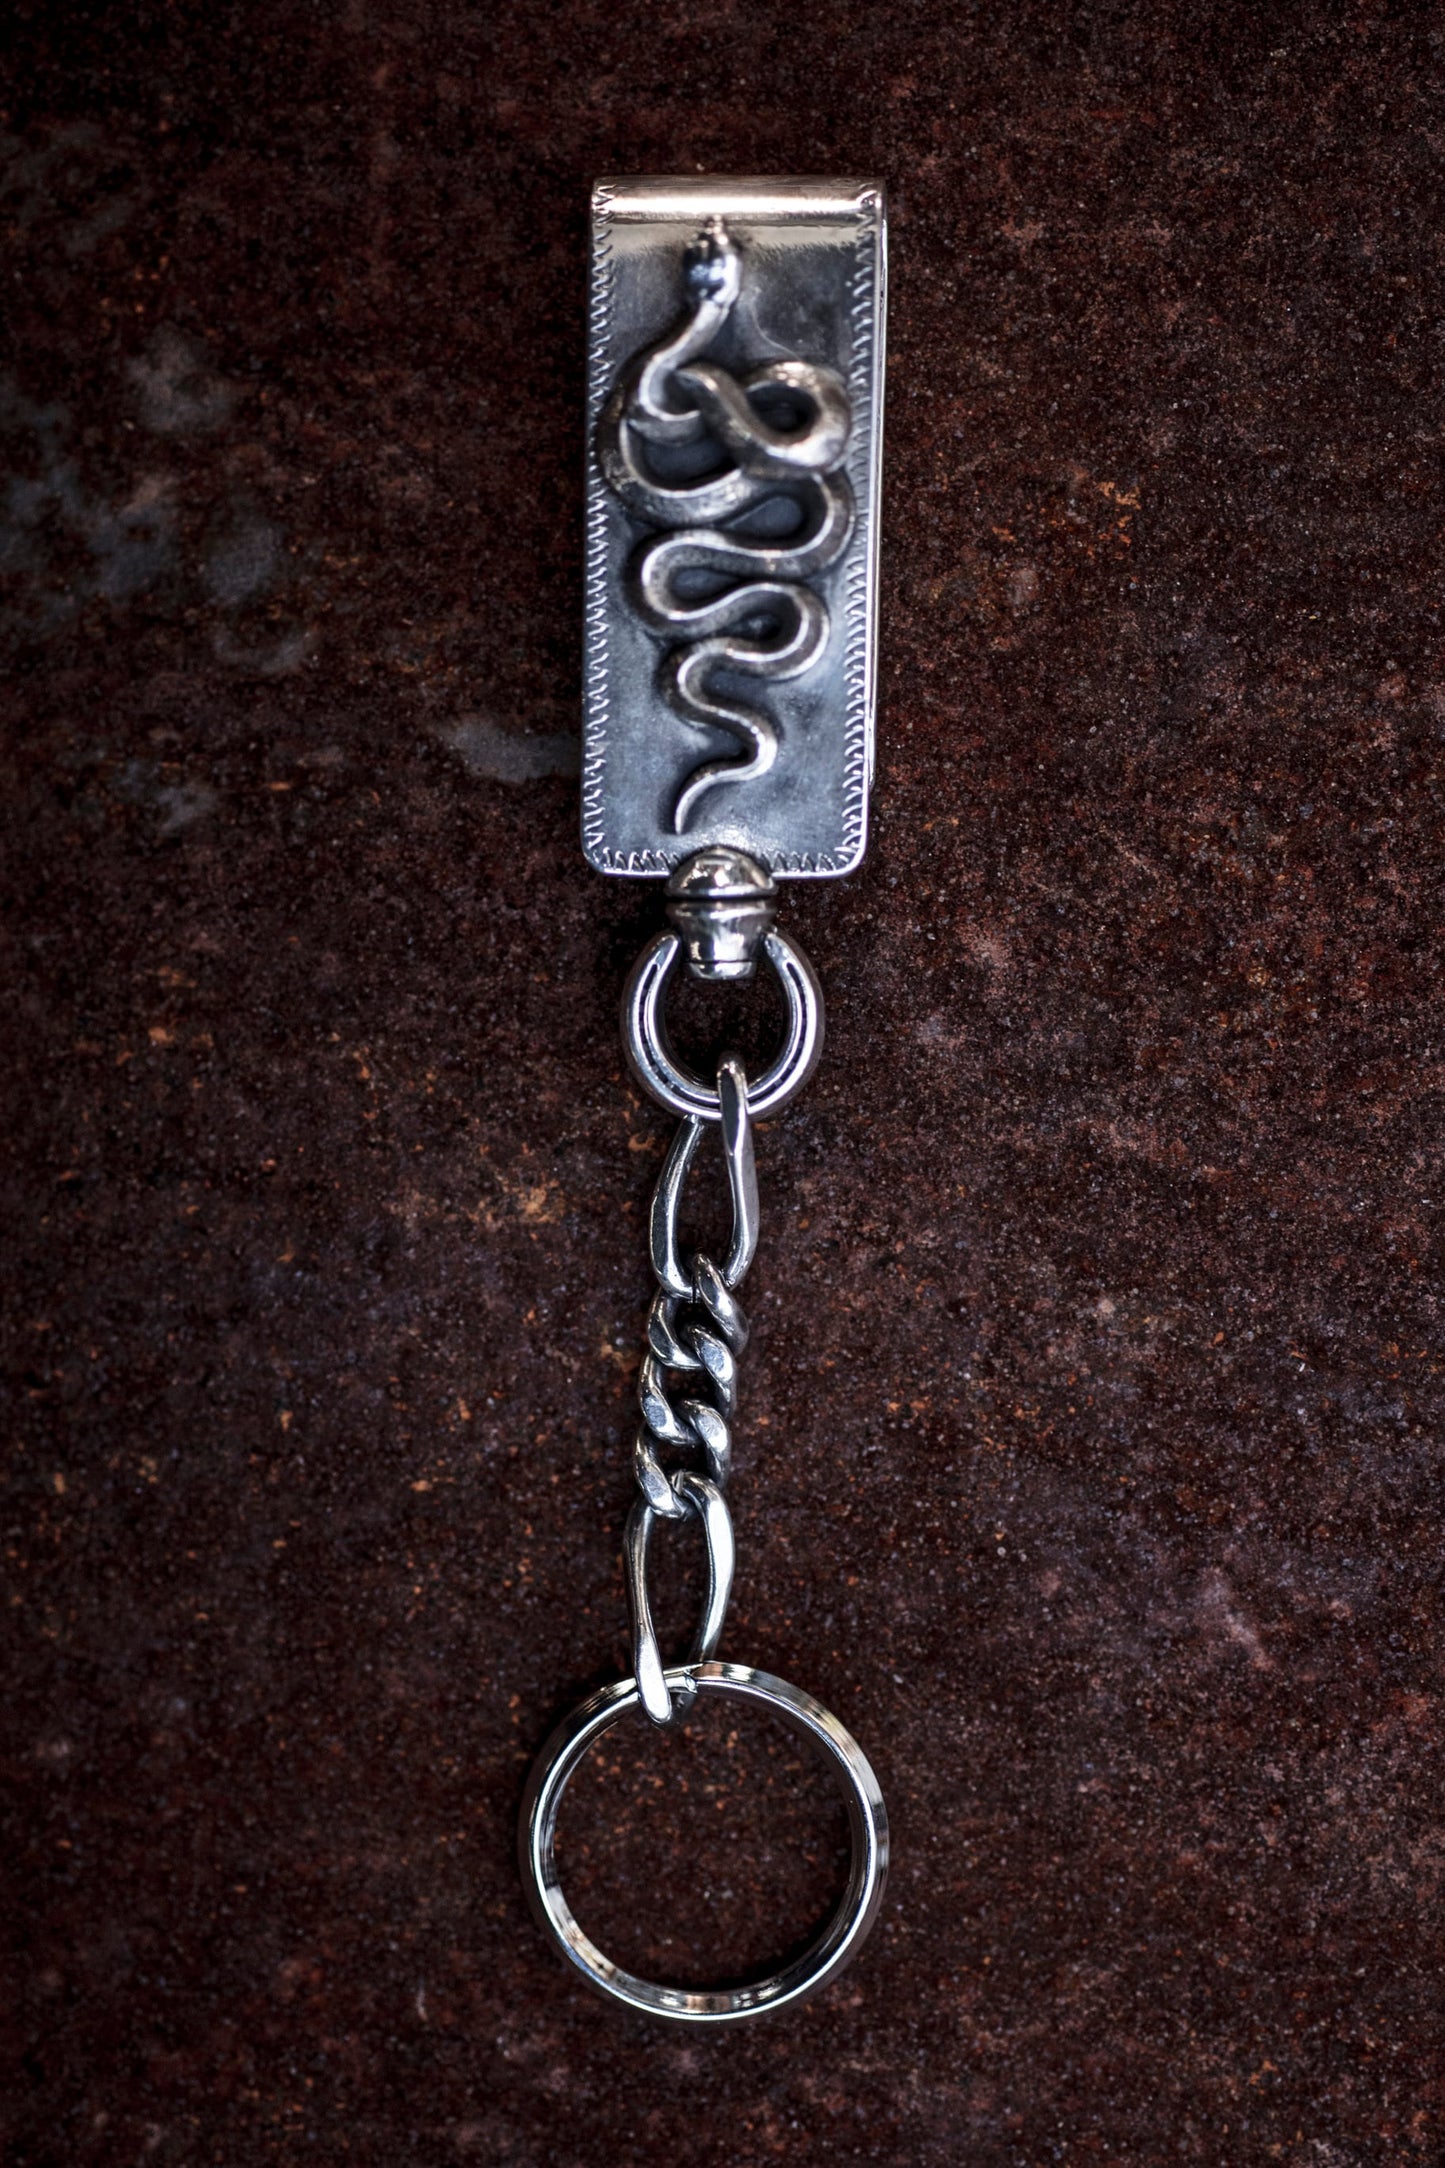 Peanuts&Co snake clip type keychain silver